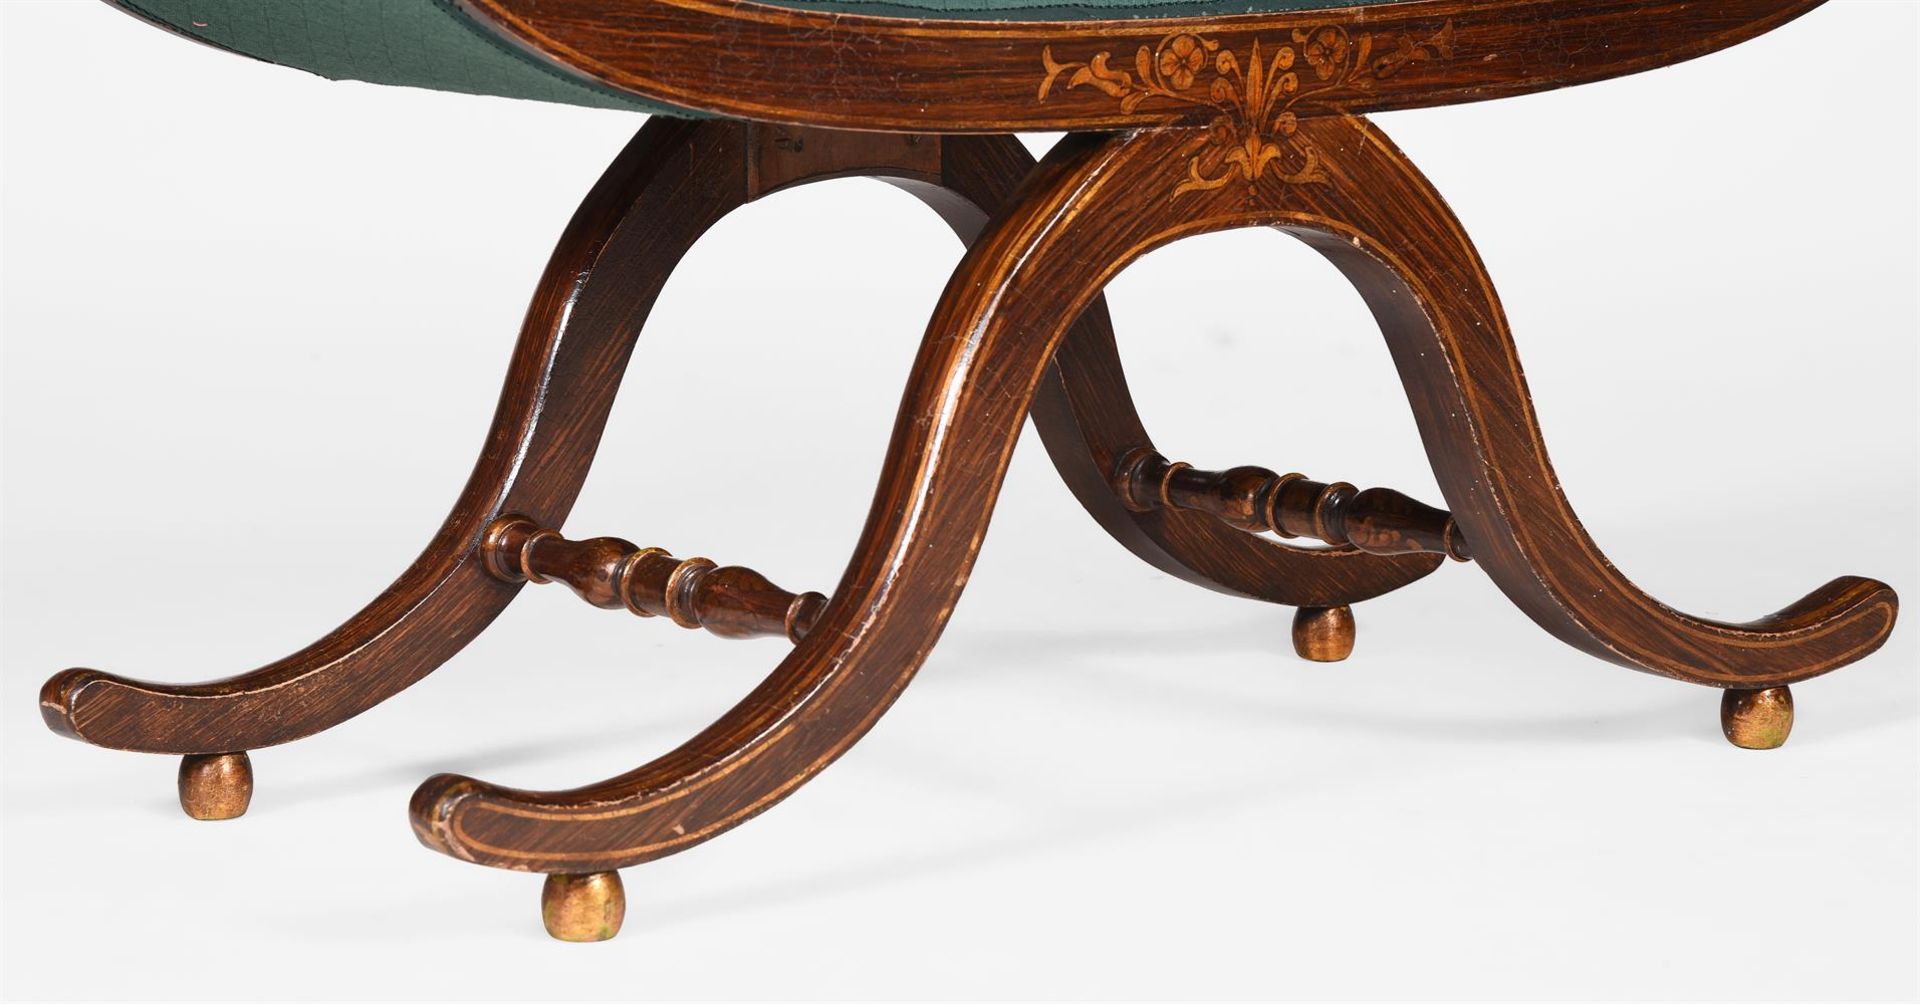 A REGENCY SIMULATED ROSEWOOD AND PARCEL GILT X FRAME STOOL OR WINDOW SEAT, EARLY 19TH CENTURY - Bild 3 aus 4